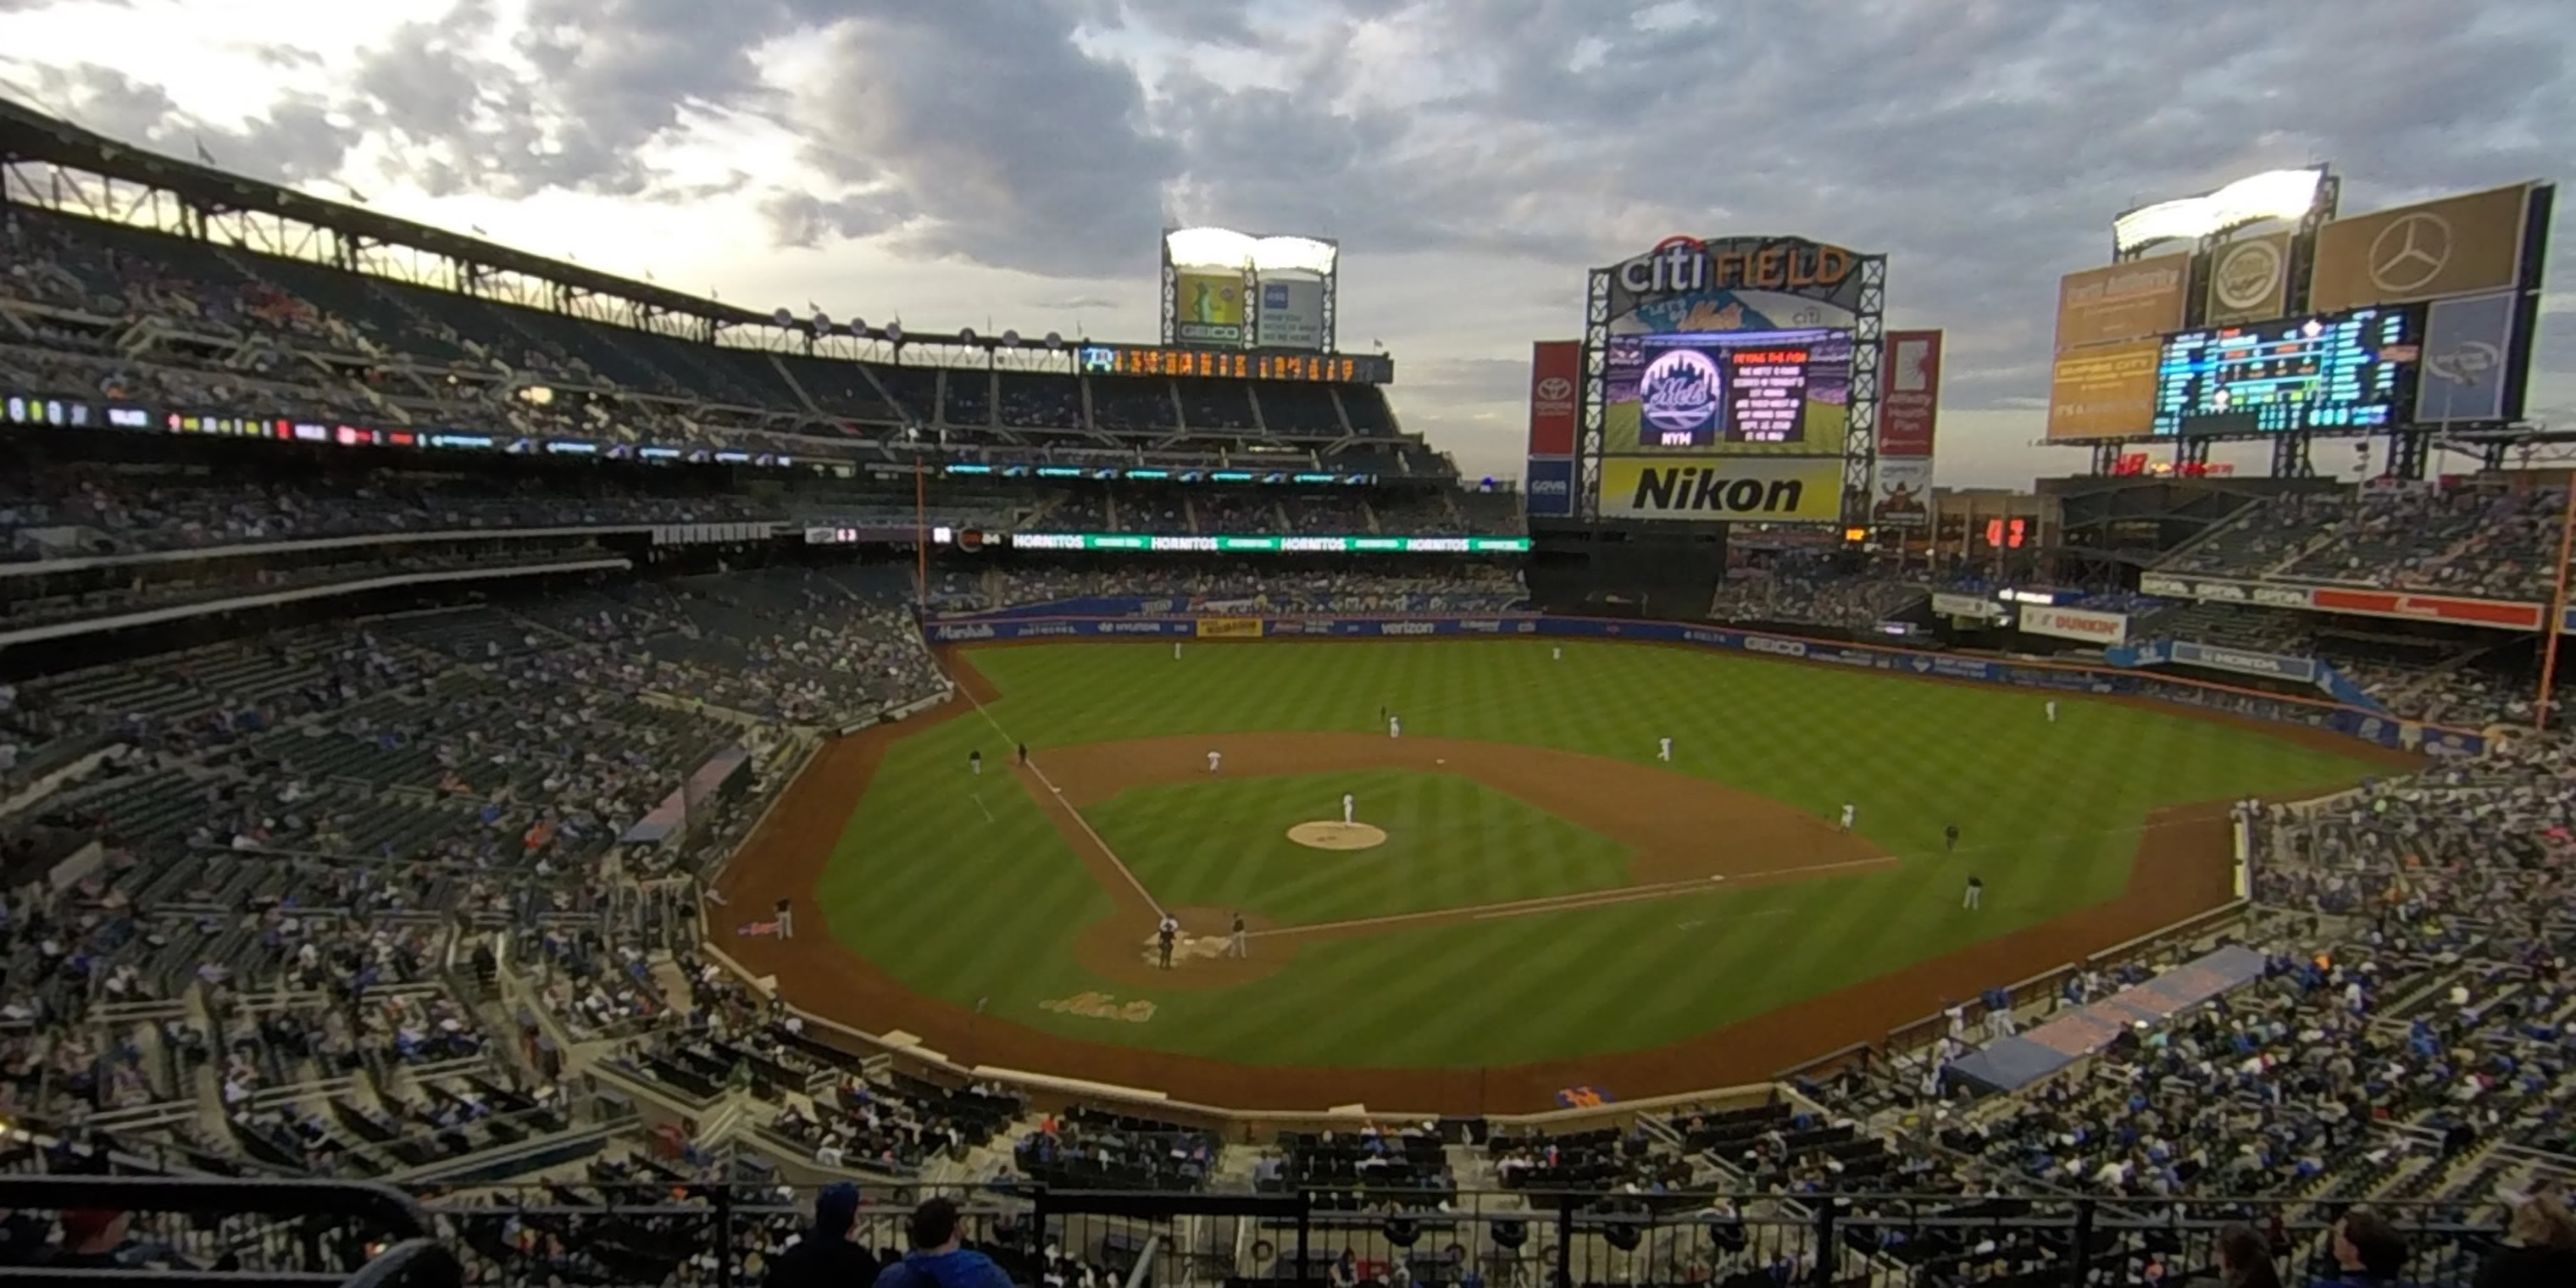 section 316 panoramic seat view  - citi field